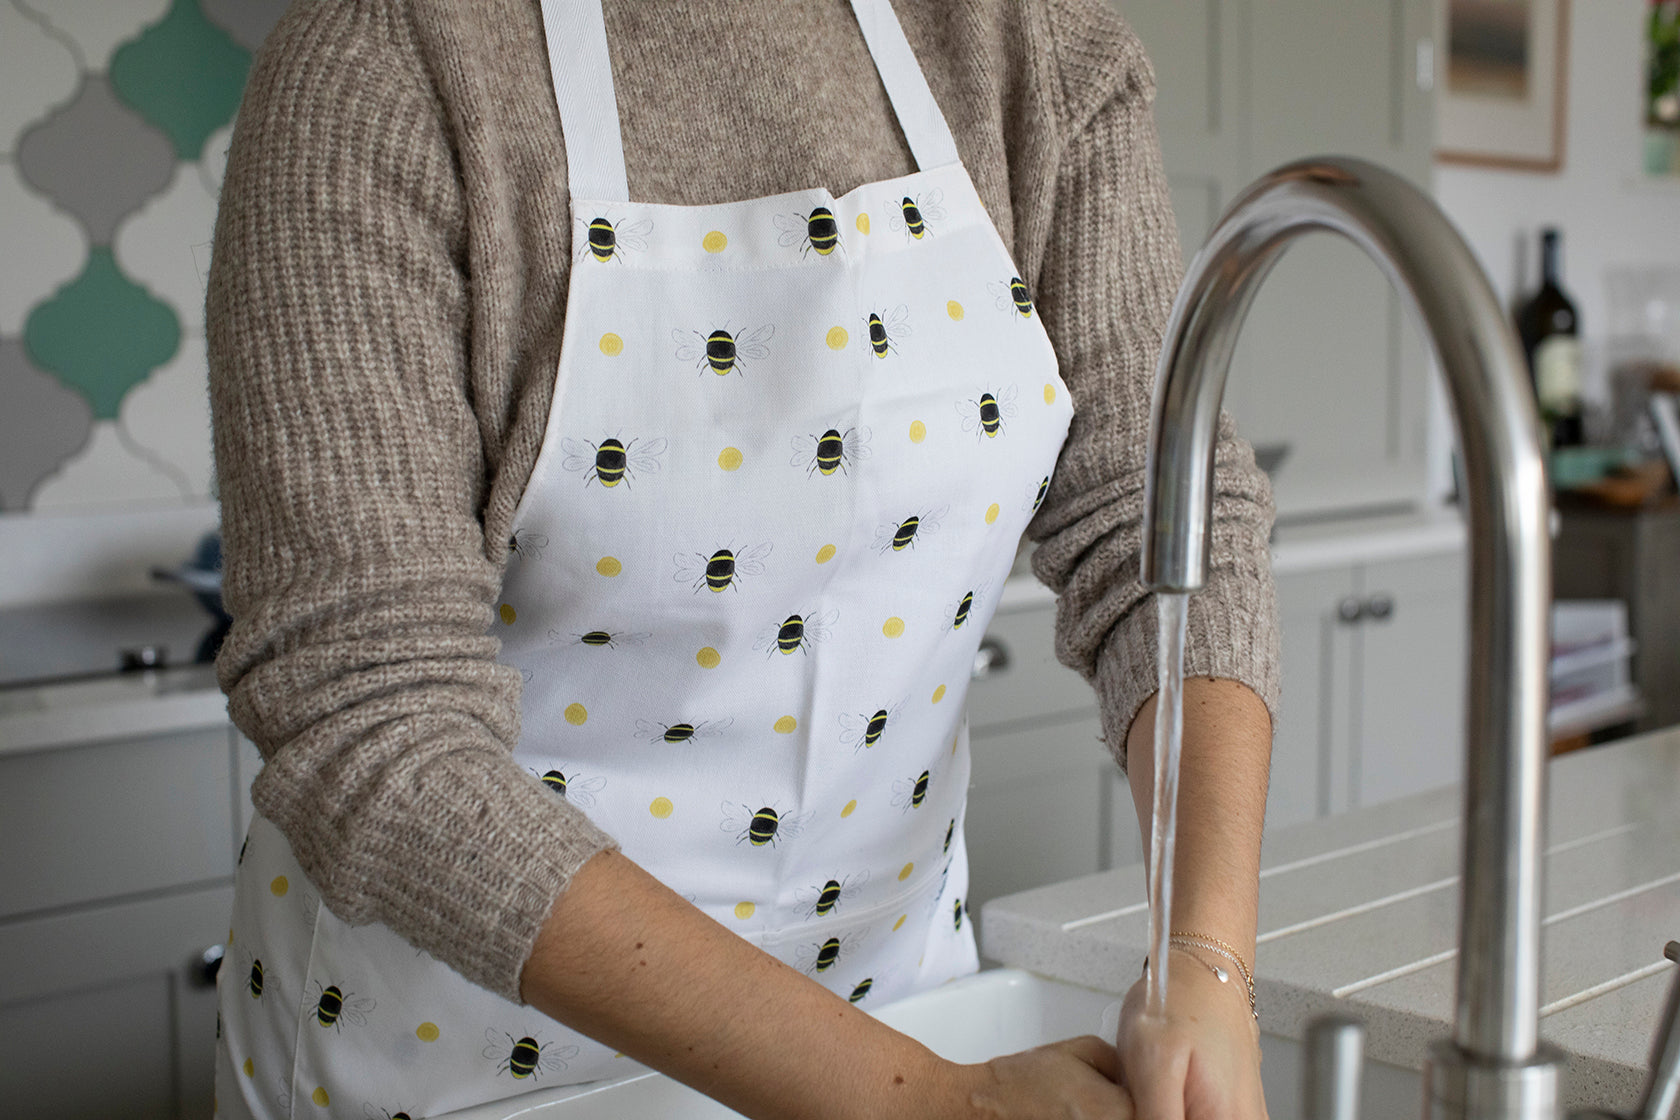 Bumble Bee adult apron for our kitchen linen homewares collection